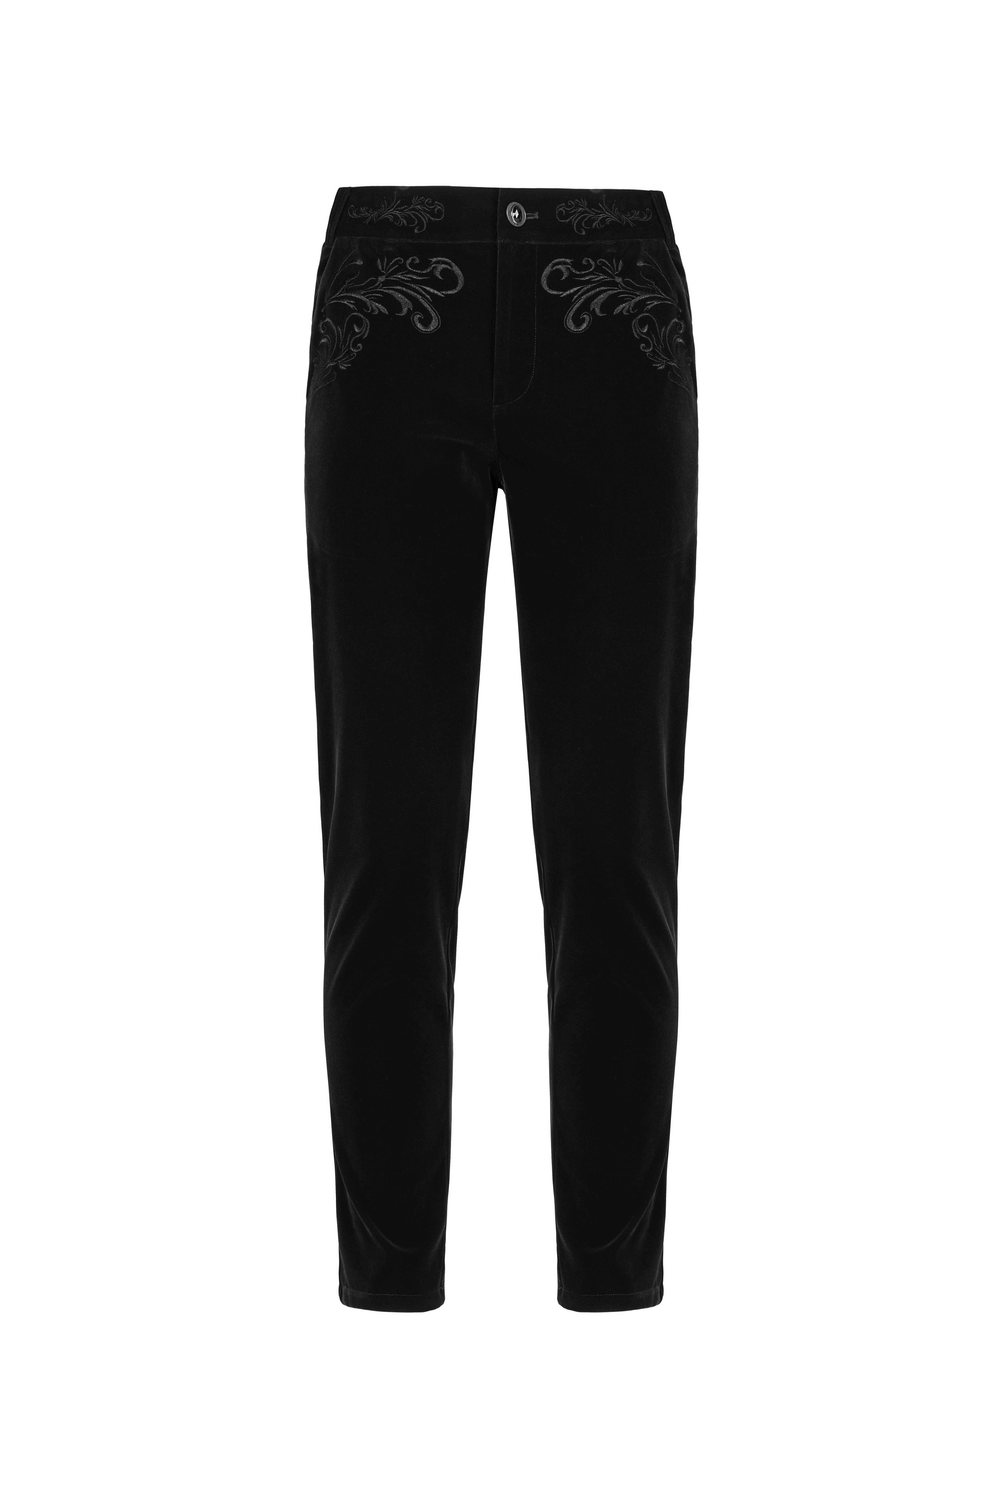 Victorian Style Embroidered Black Velvet Gothic Trousers